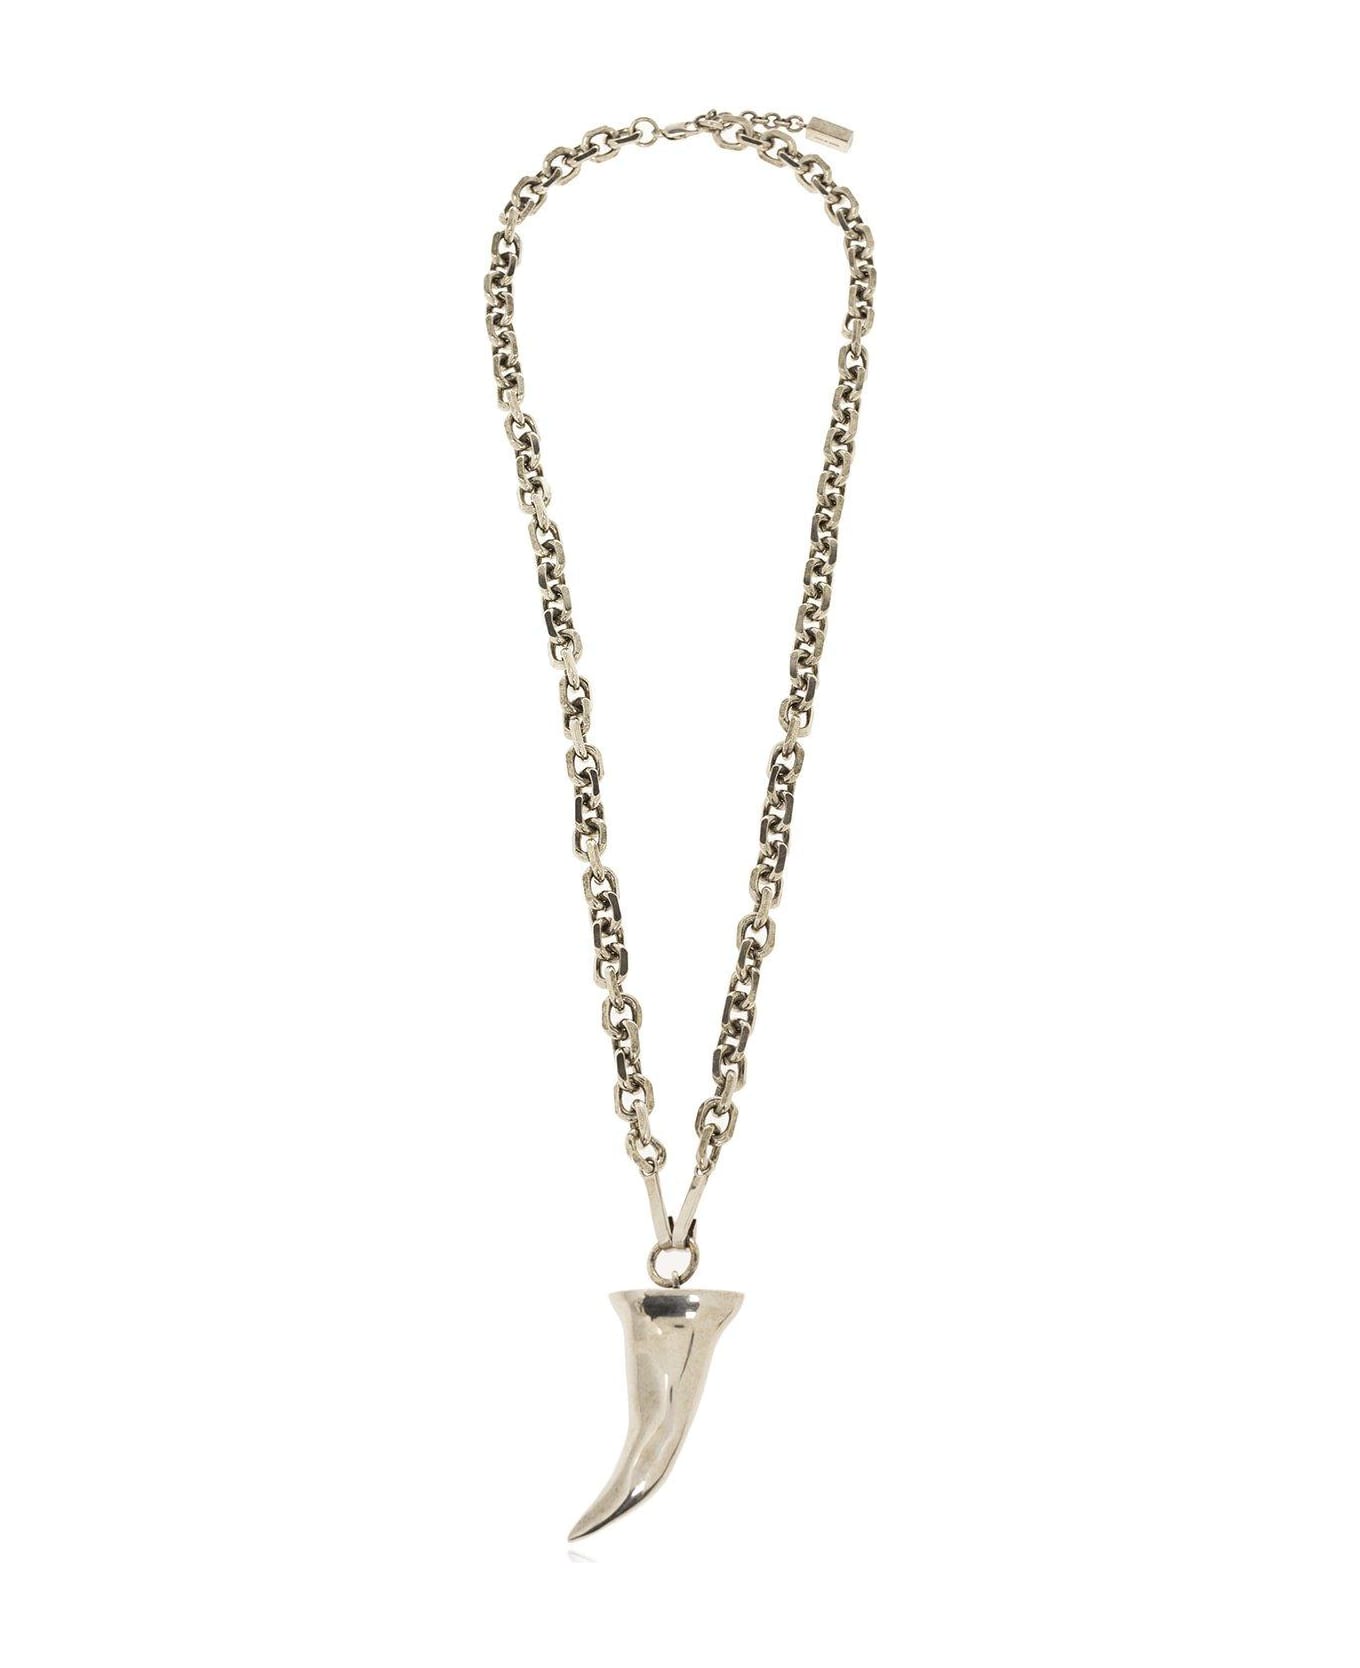 Givenchy Horn Necklace - ARGENTO ネックレス